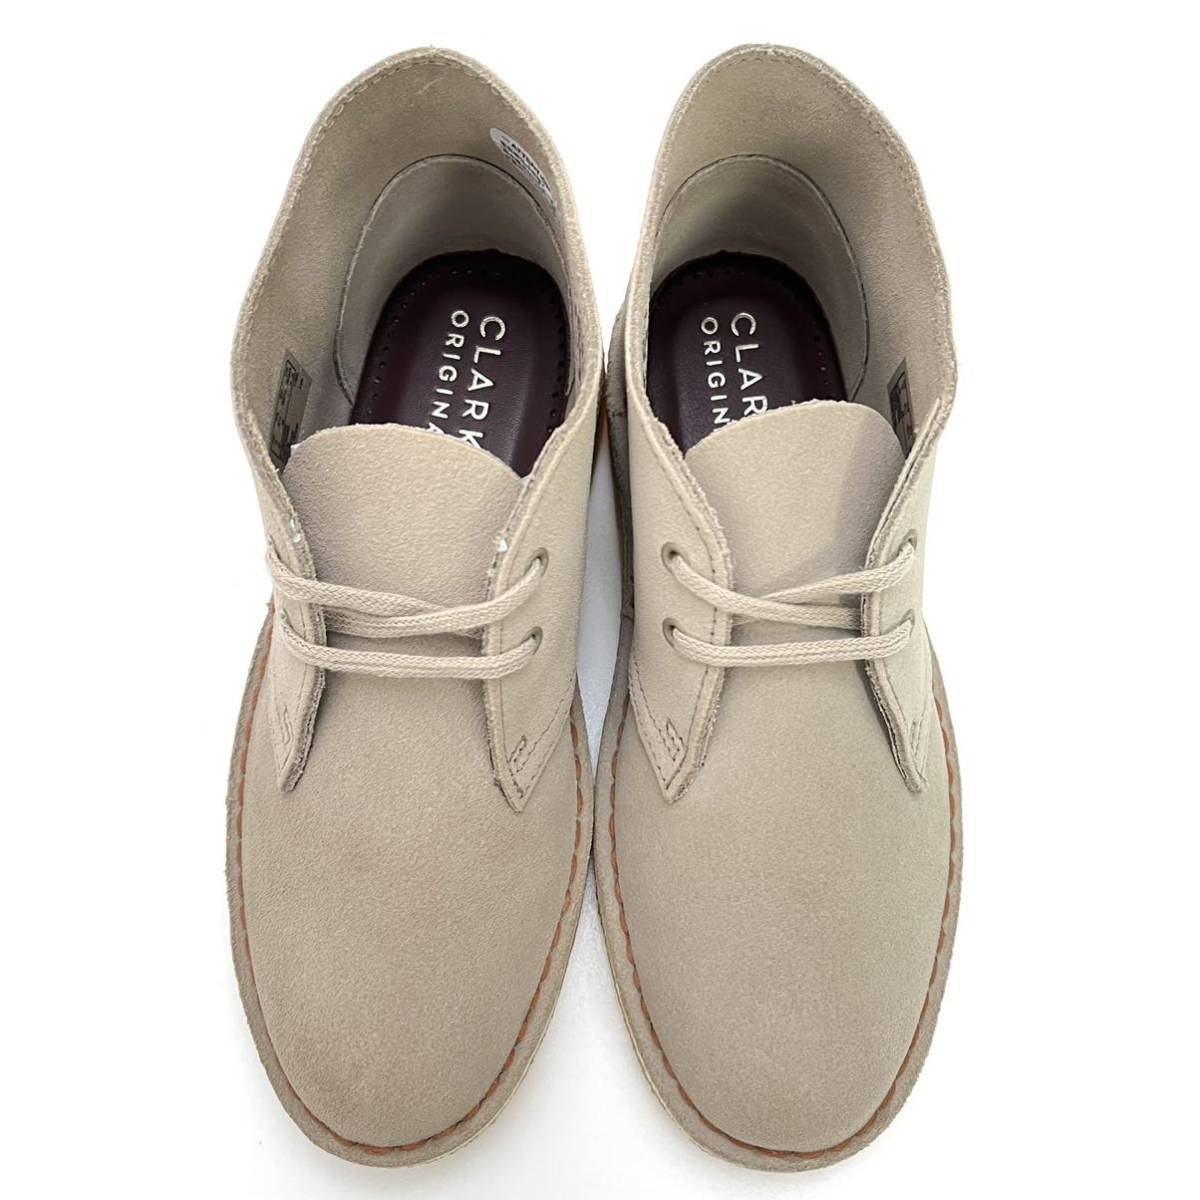 Clarks Clarks Desert Boot desert boots chukka boots suede leather original leather shoes 22cm 3 Sand Suede sand beige 